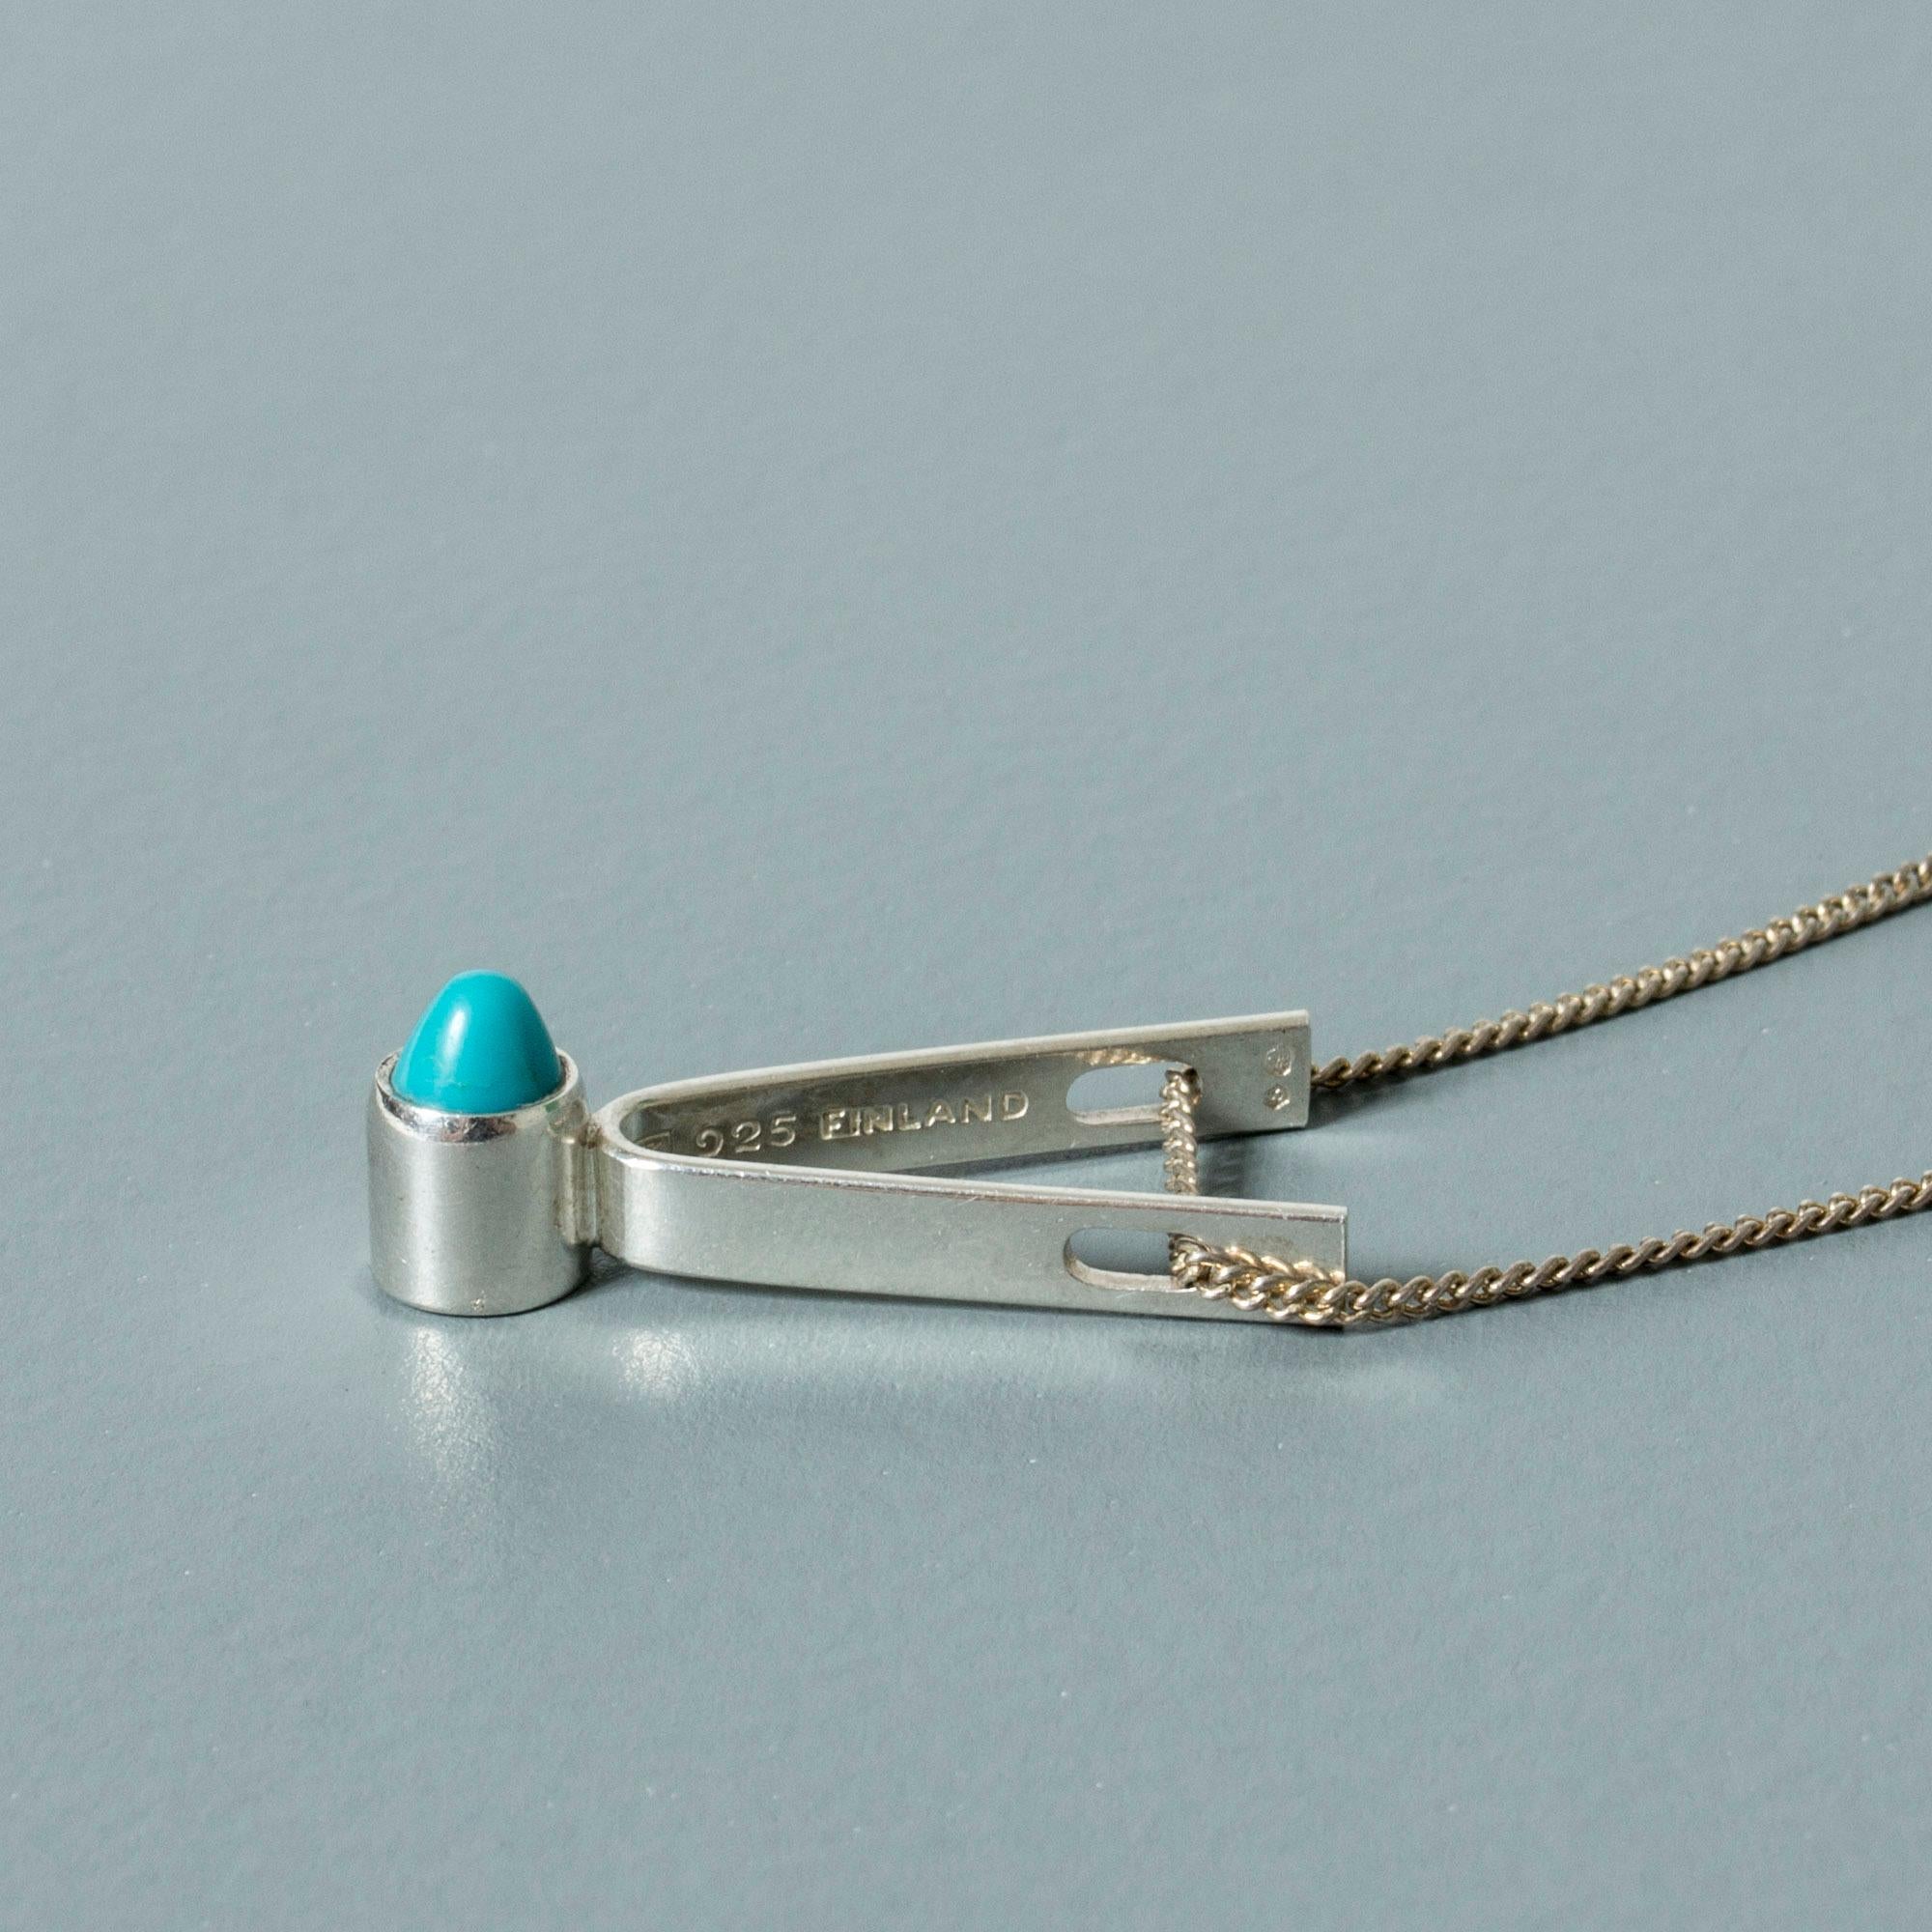 Bullet Cut Silver and Turquoise Pendant by Elis Kauppi